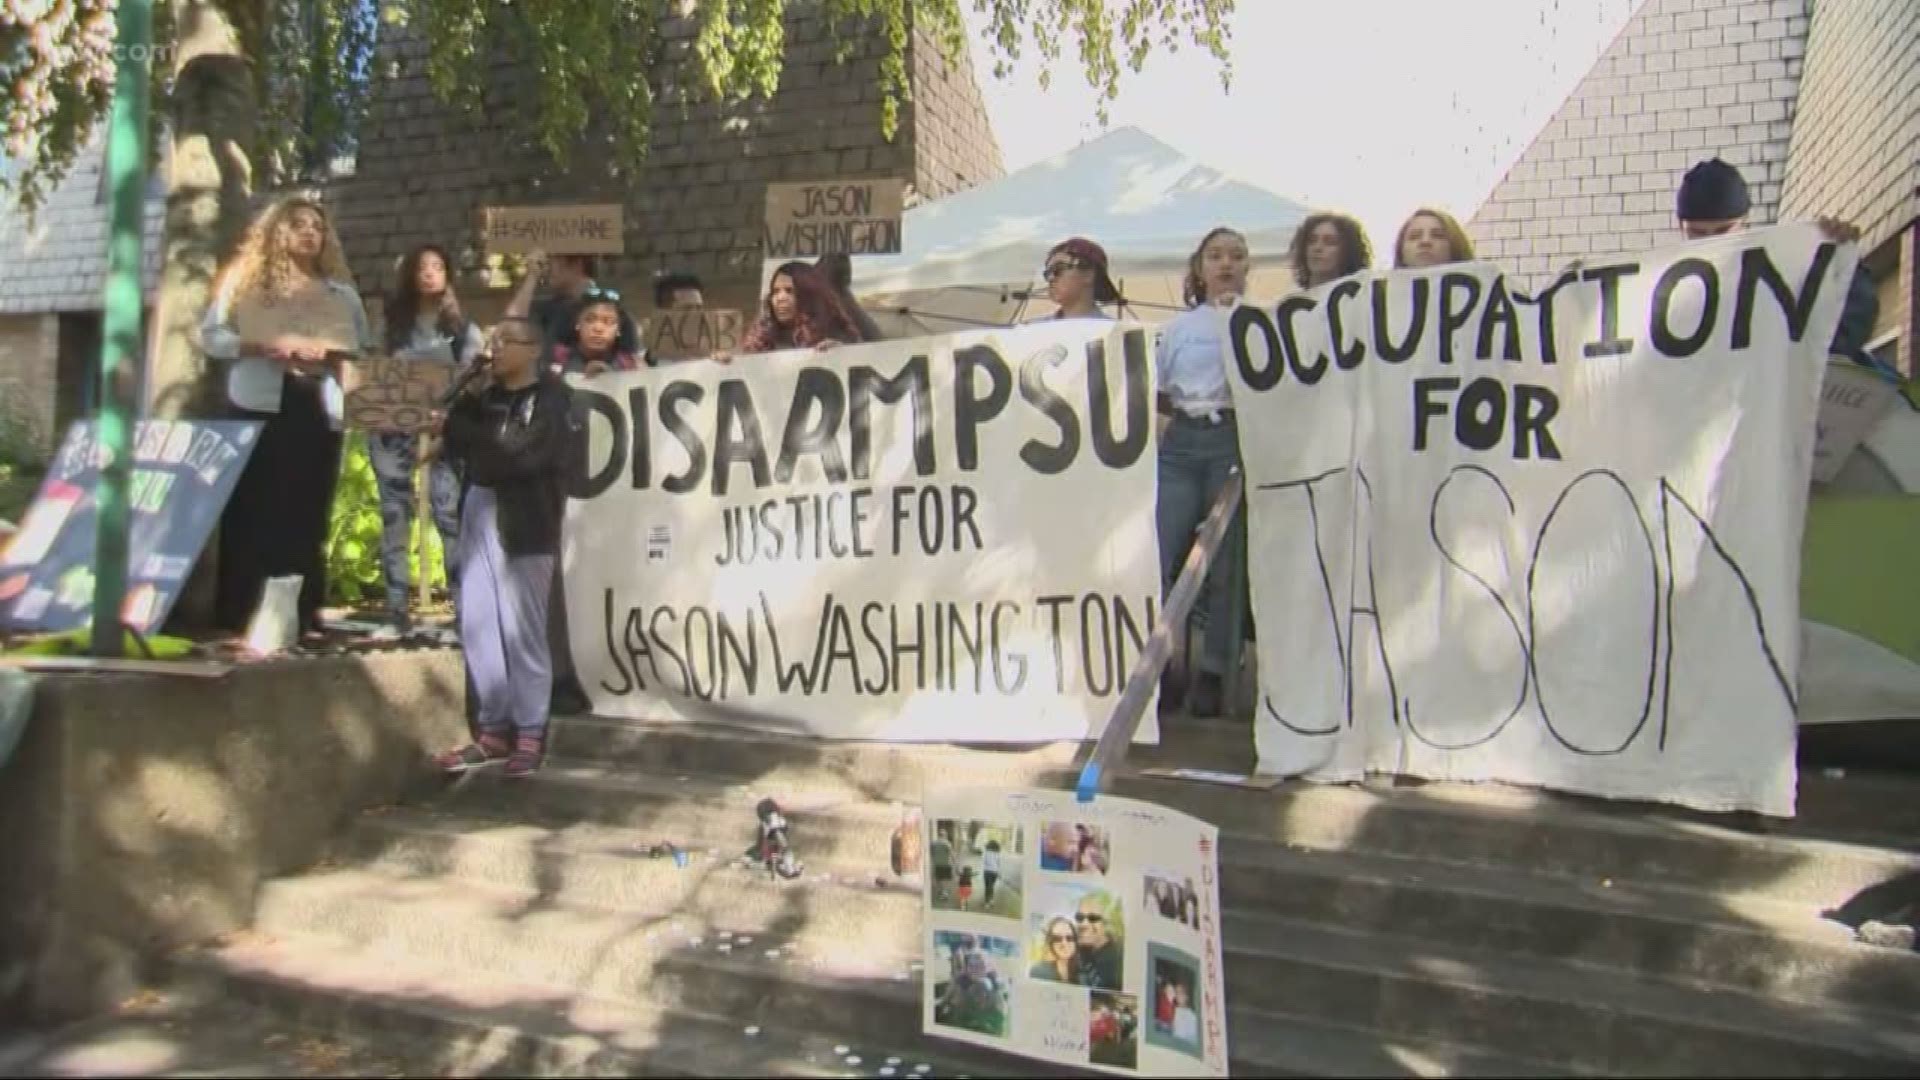 PSU students want campus police disarmed